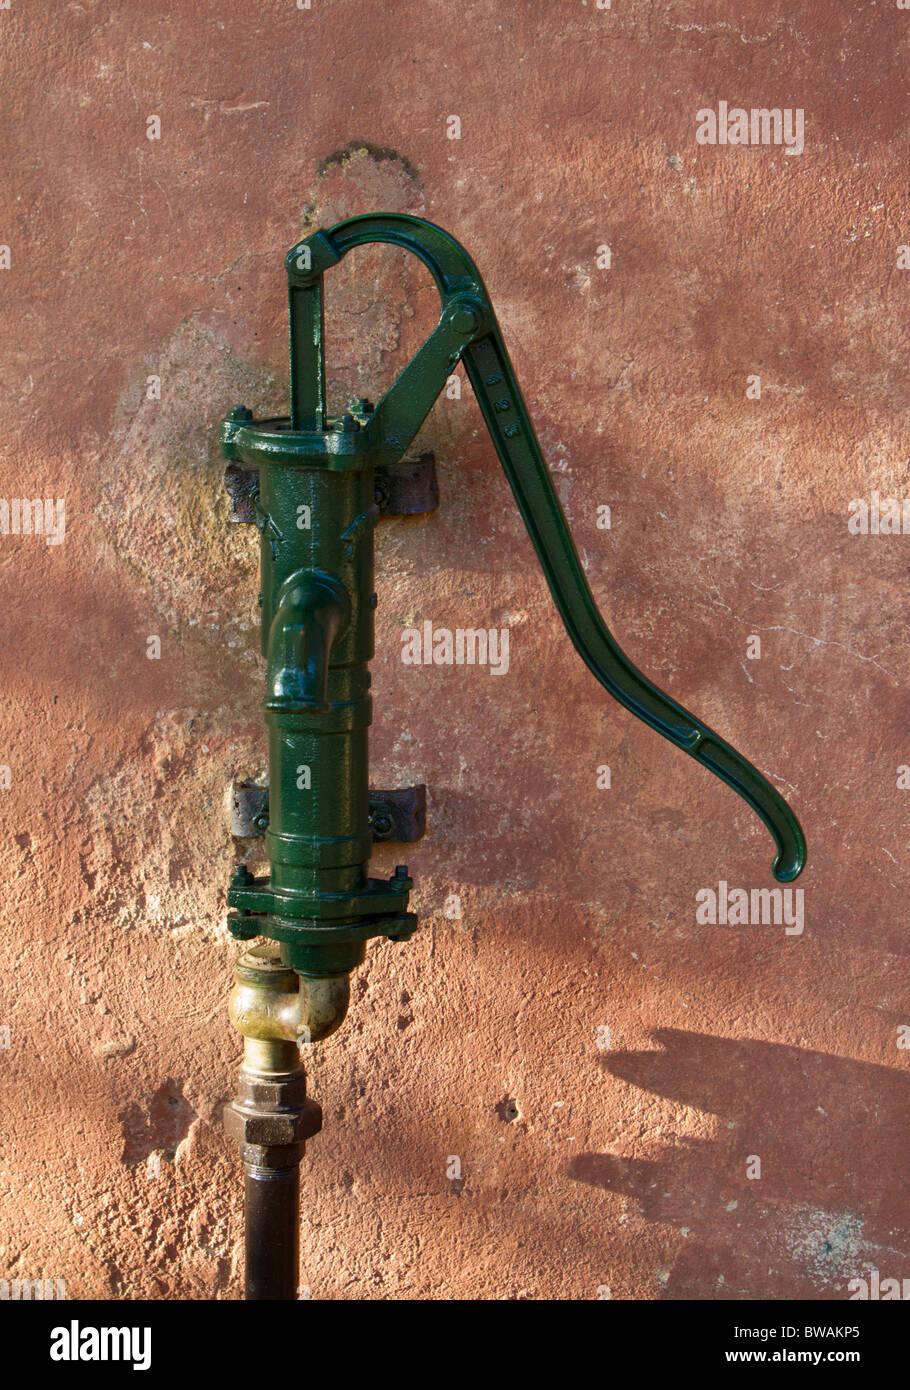 Traditional hand-pump as used to pump water from a well for domestic use Stock Photo